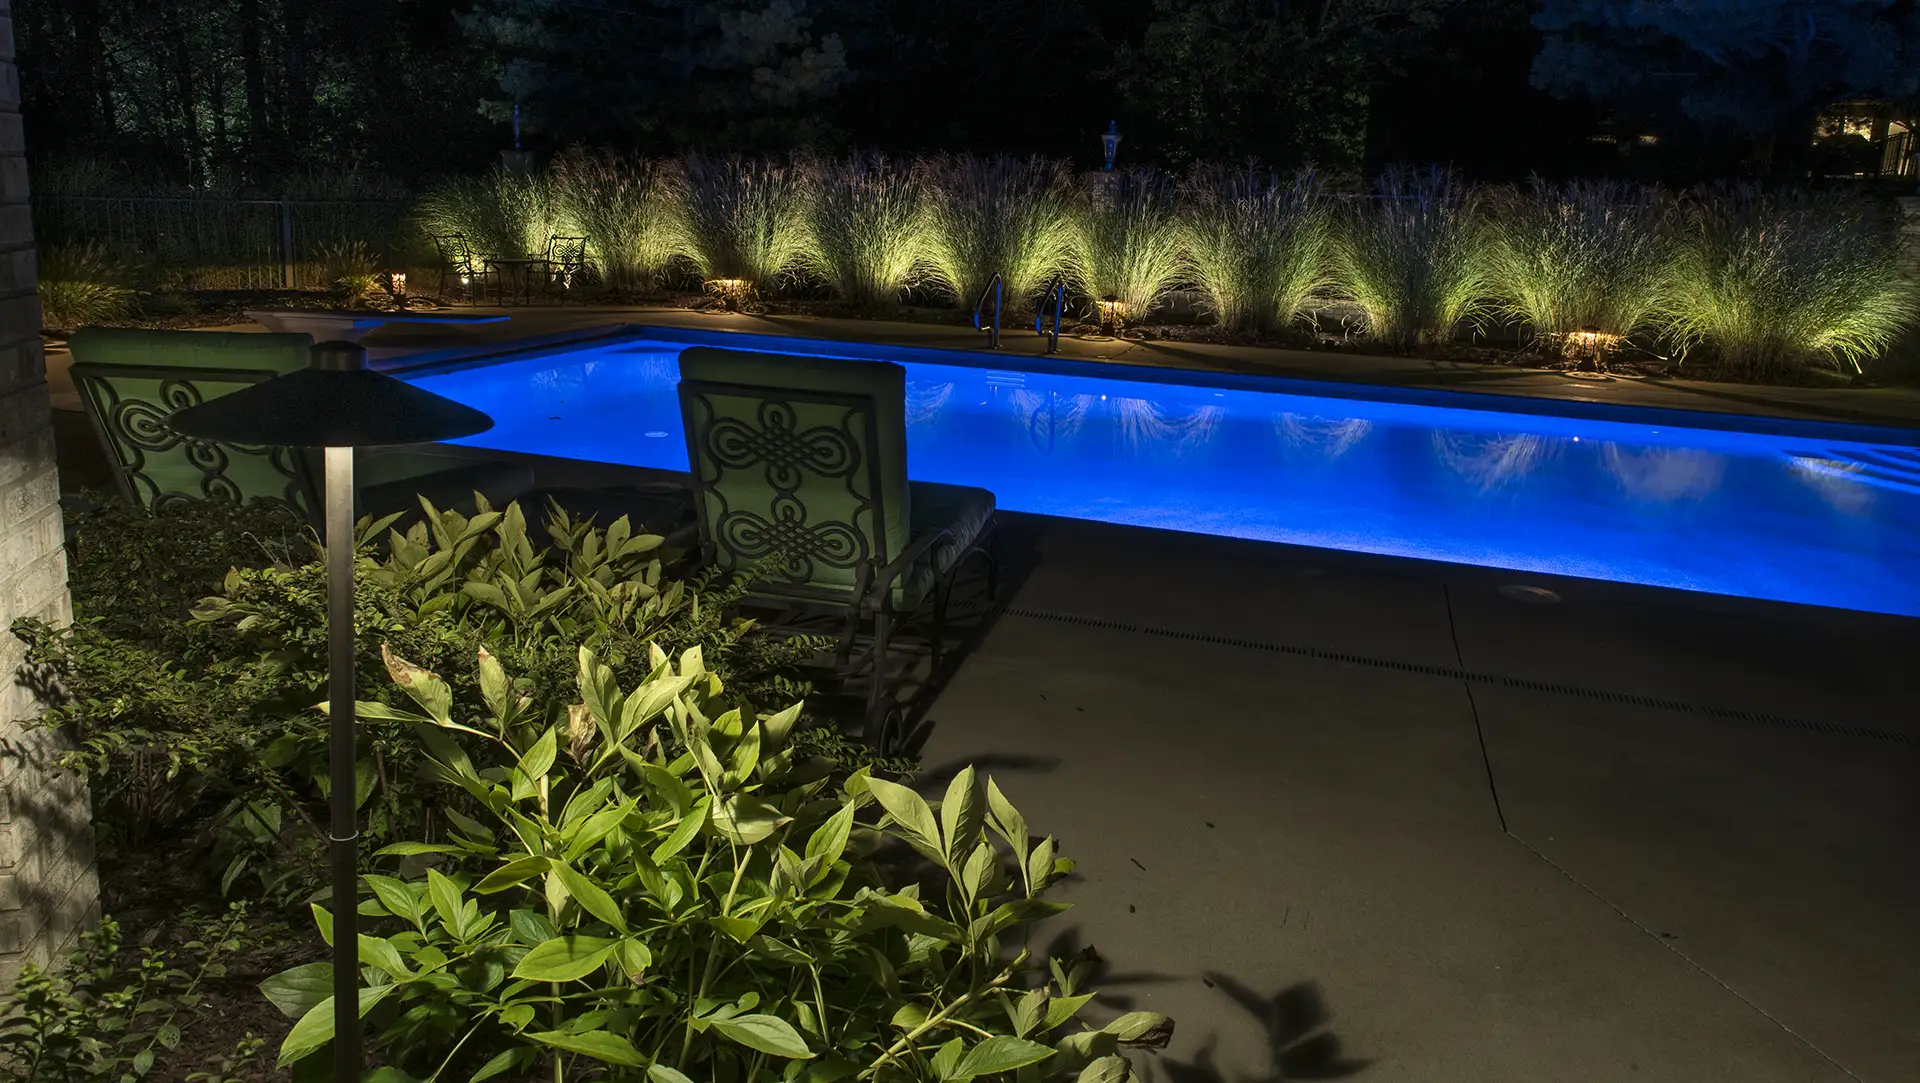 Schneider residence image 9 pool seating area Lighthouse Outdoor Lighting and Audio central Missouri